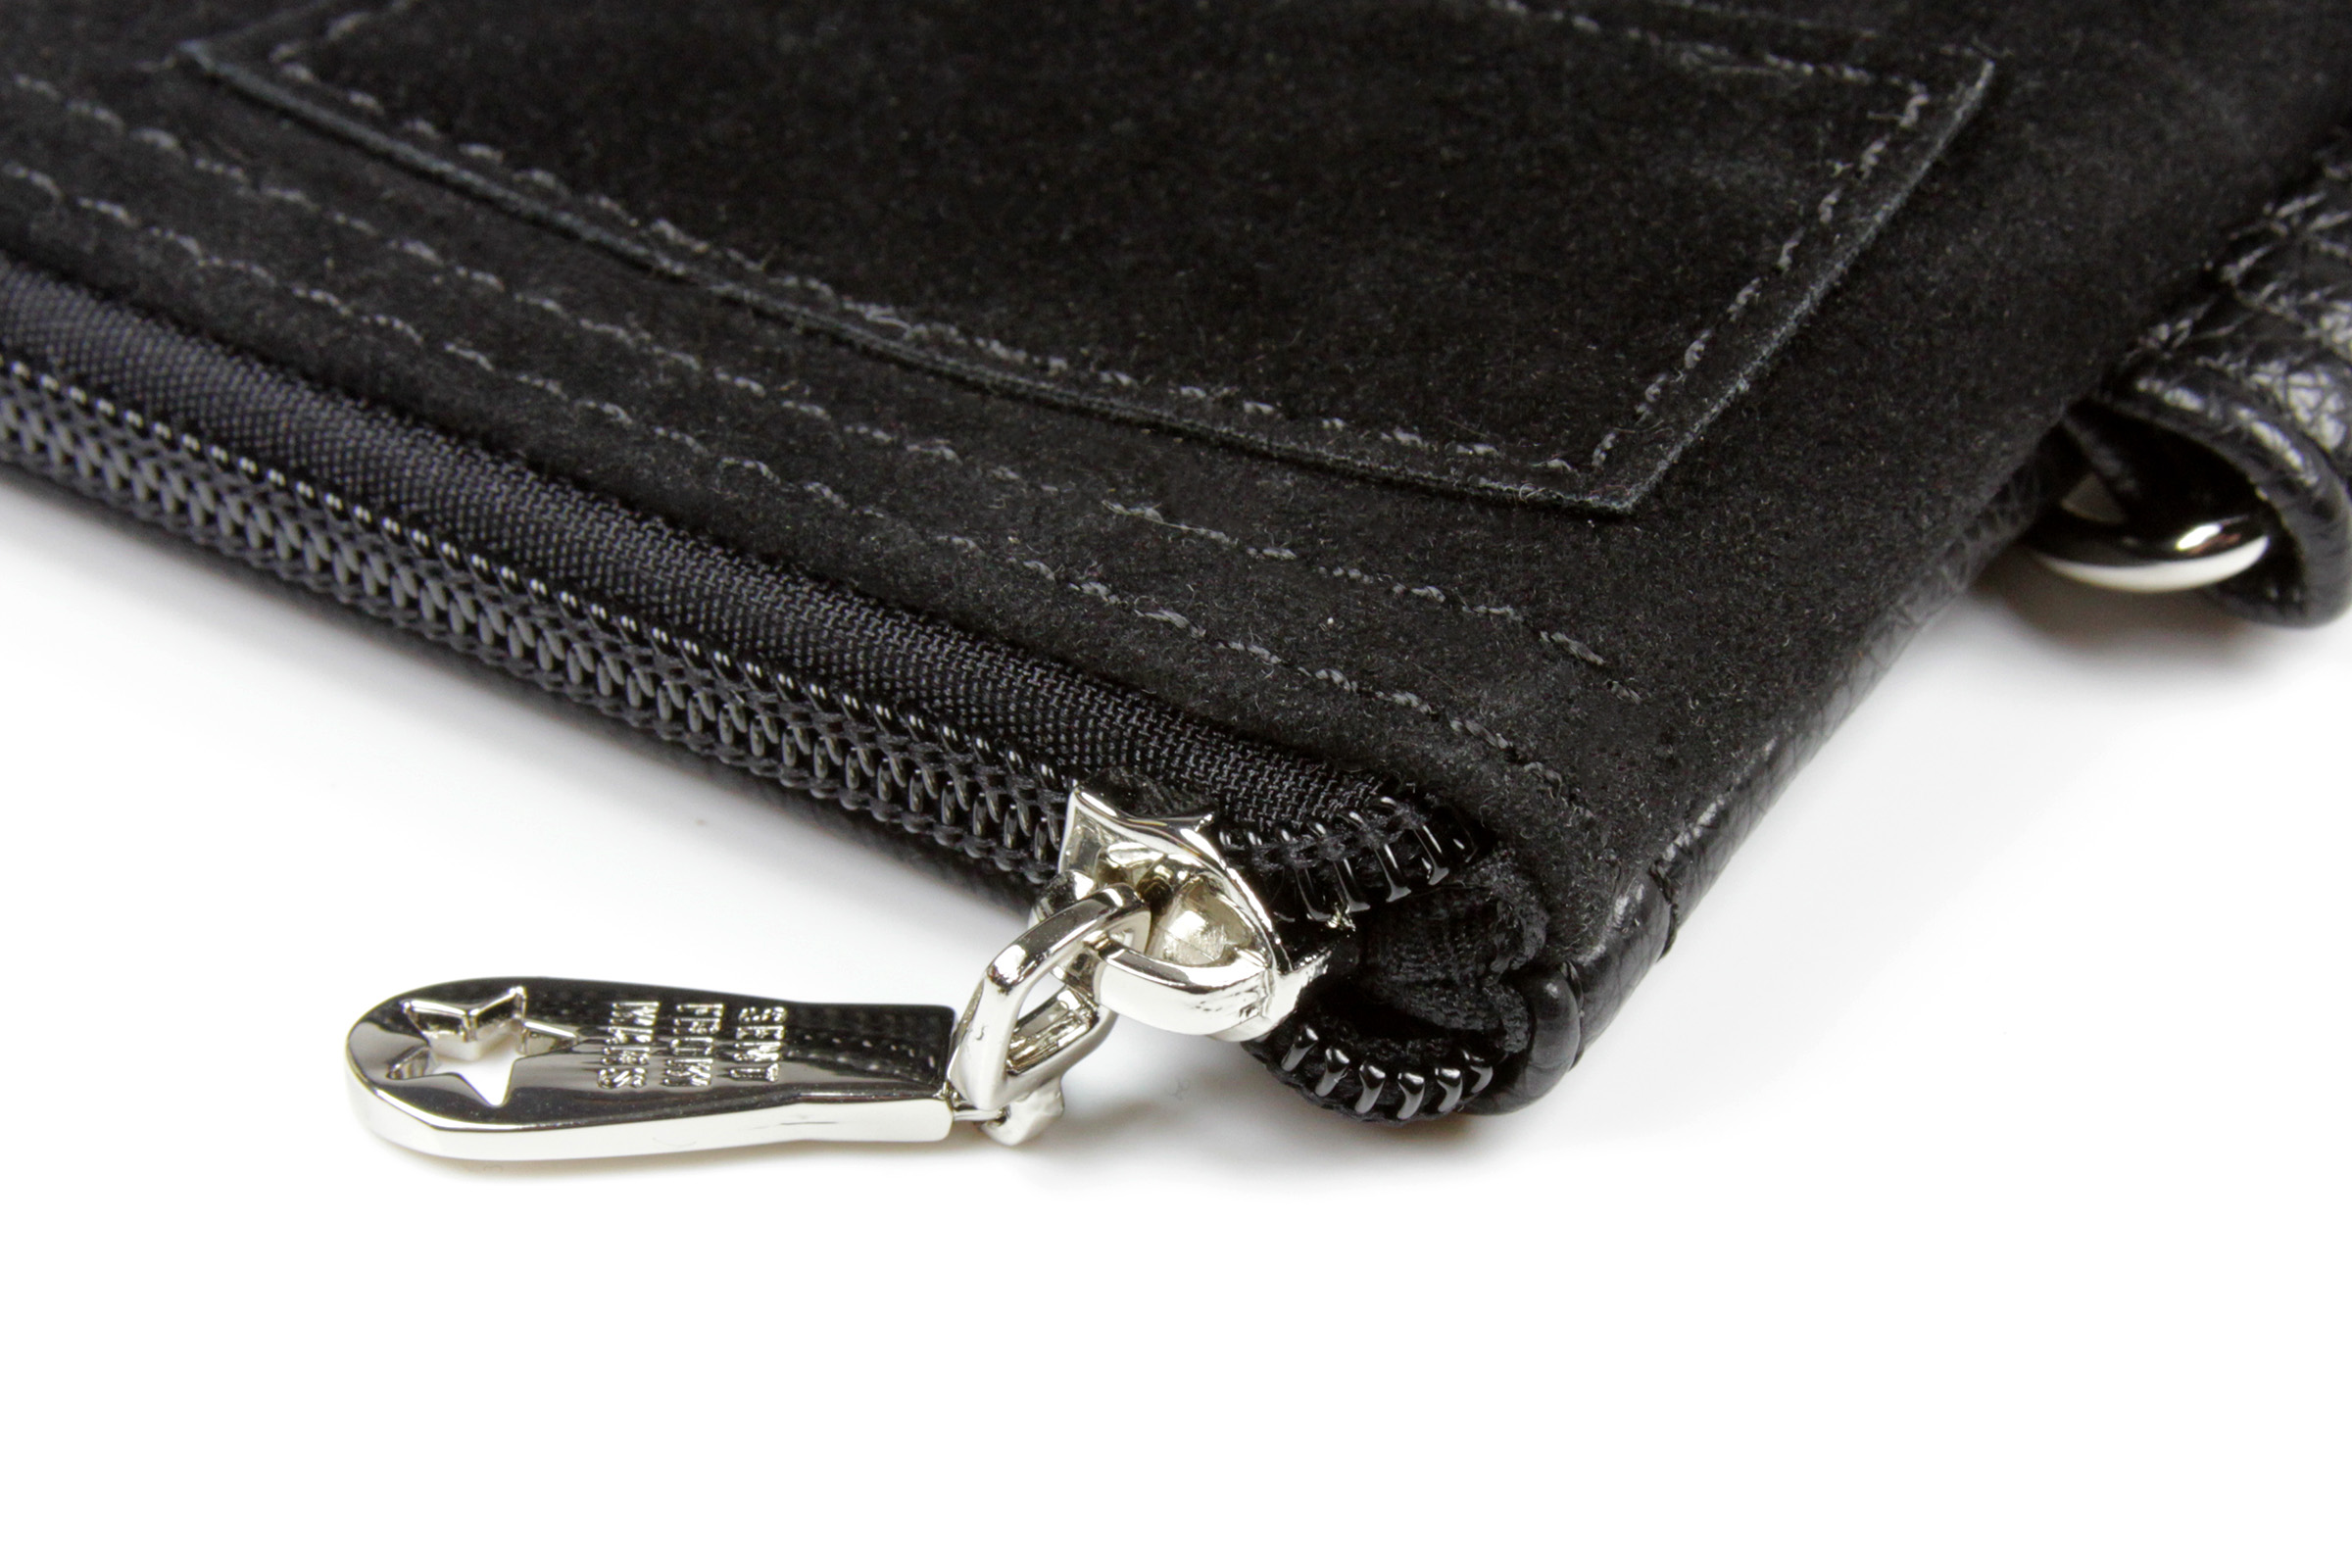 Sent From Mars - Star Wars Han Solo Inspired Millennium Purse